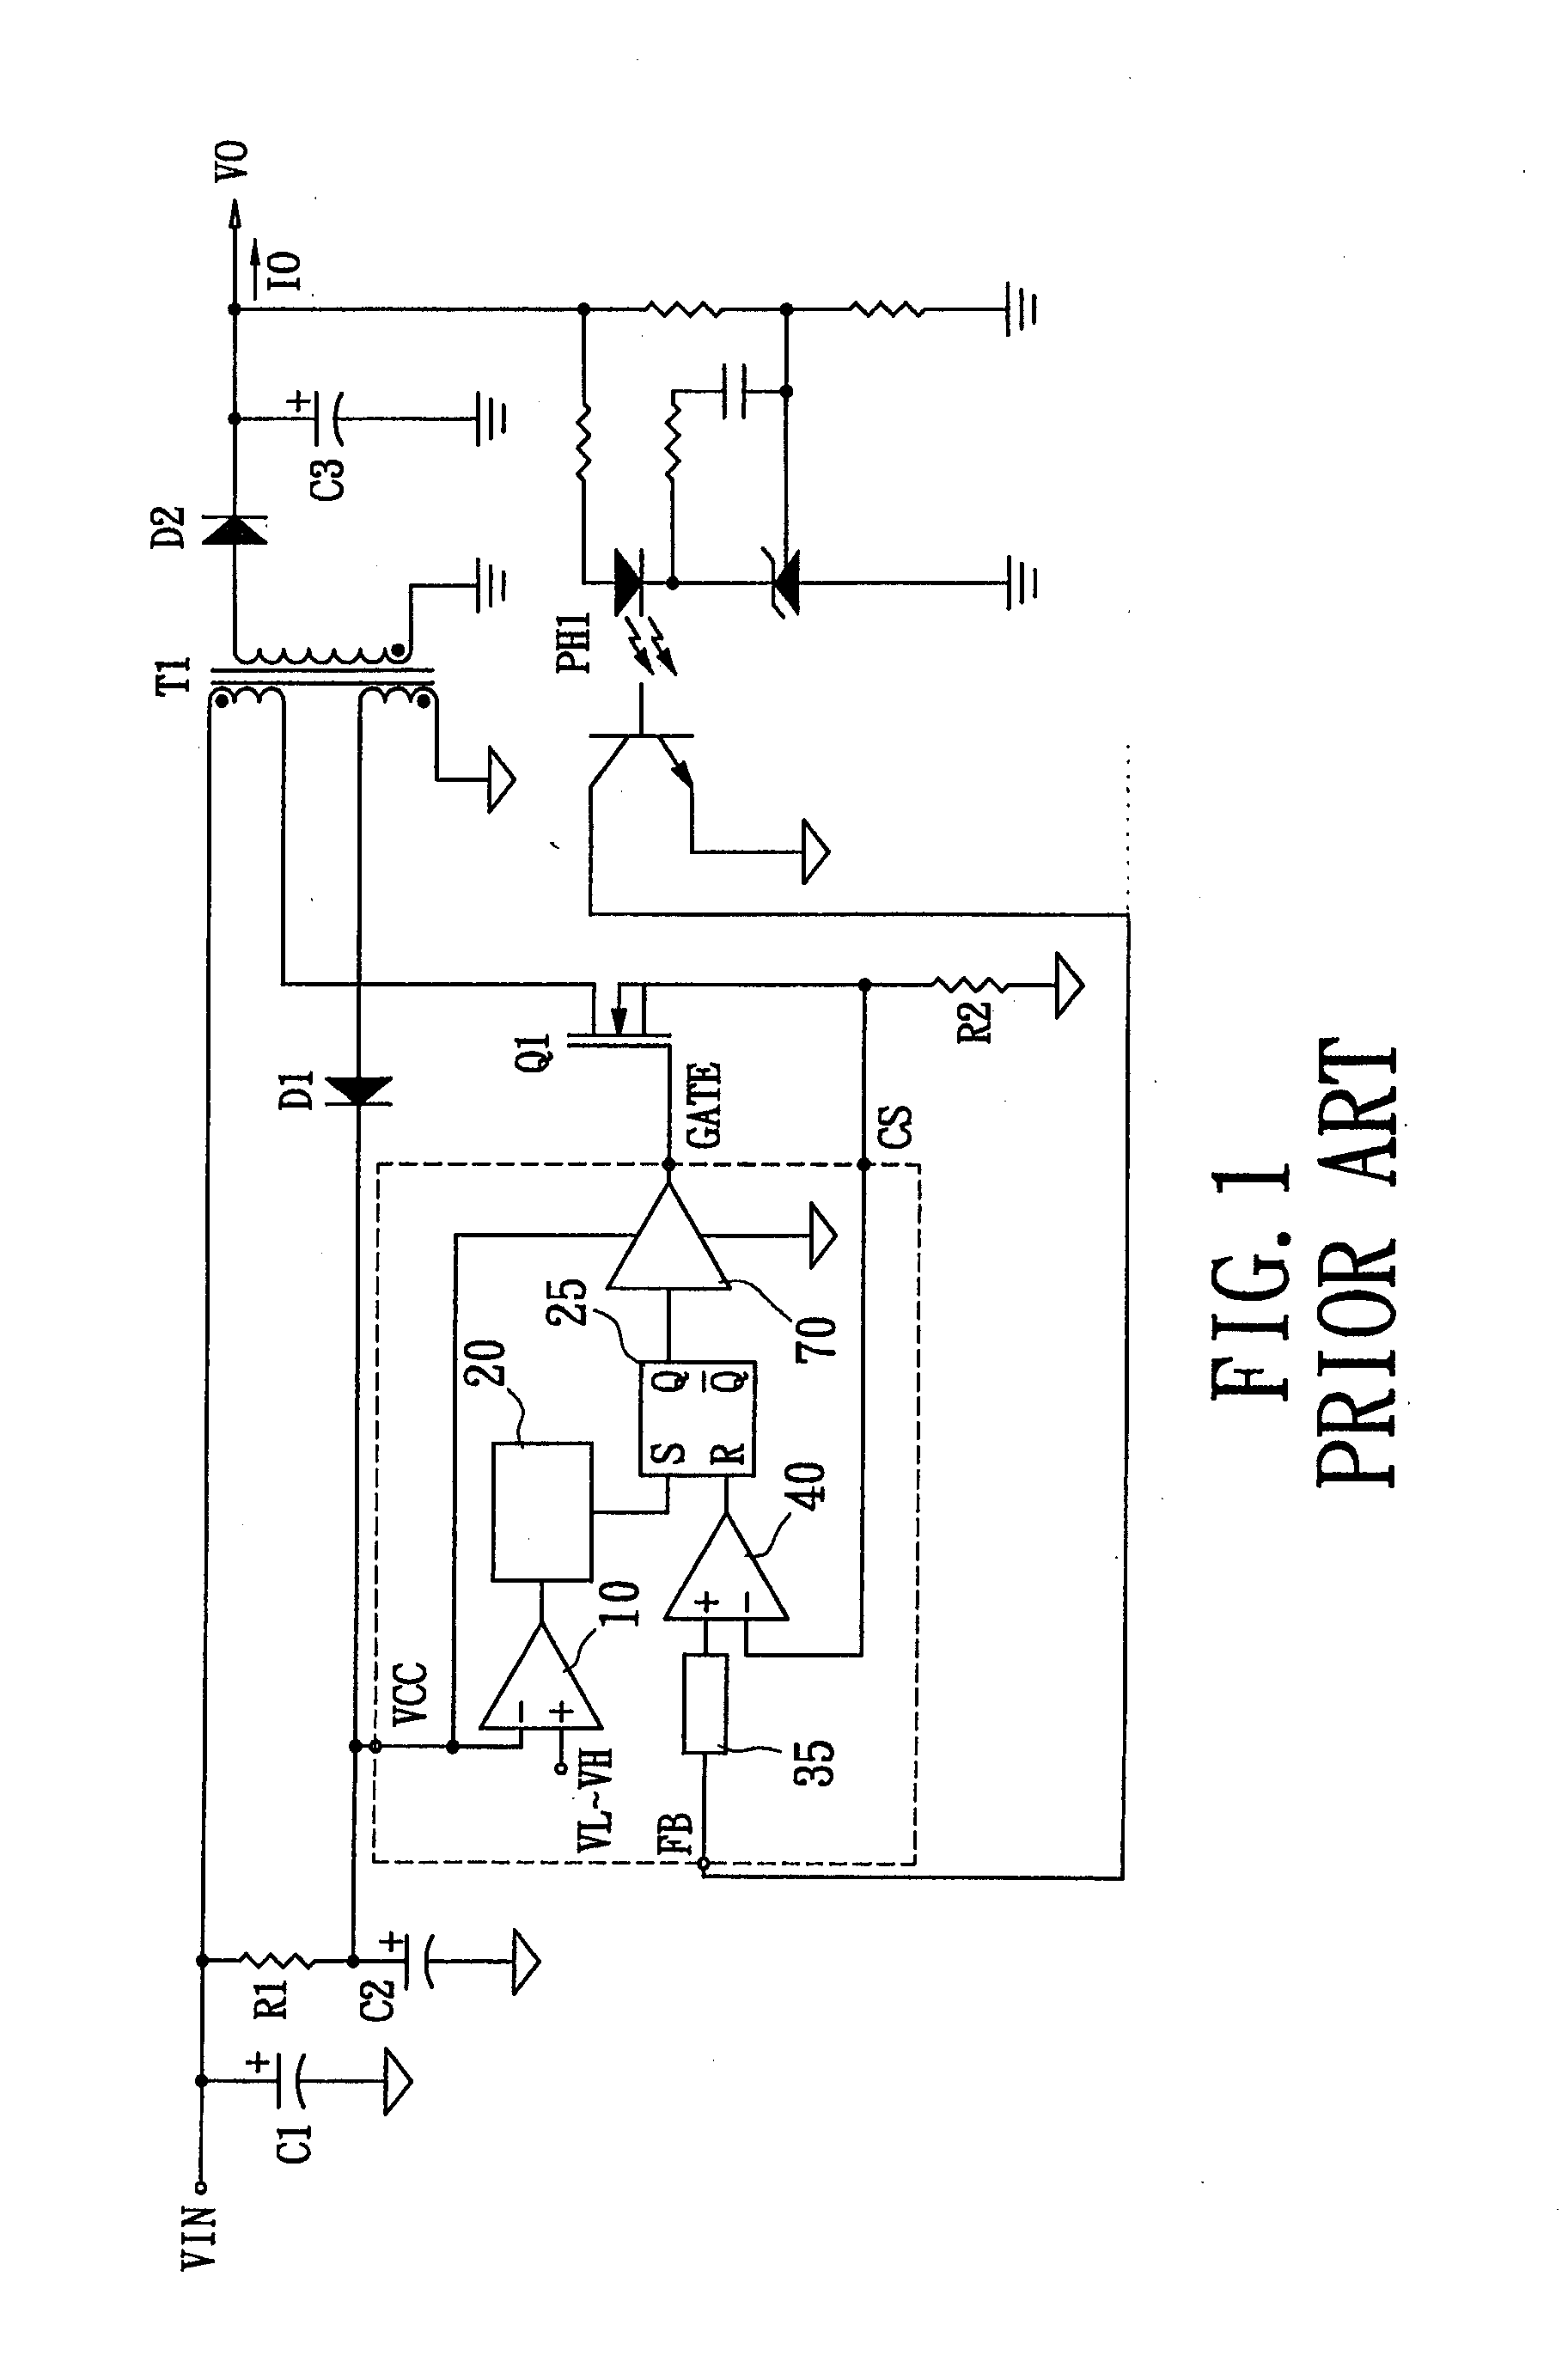 Pwm controller with output current limitation